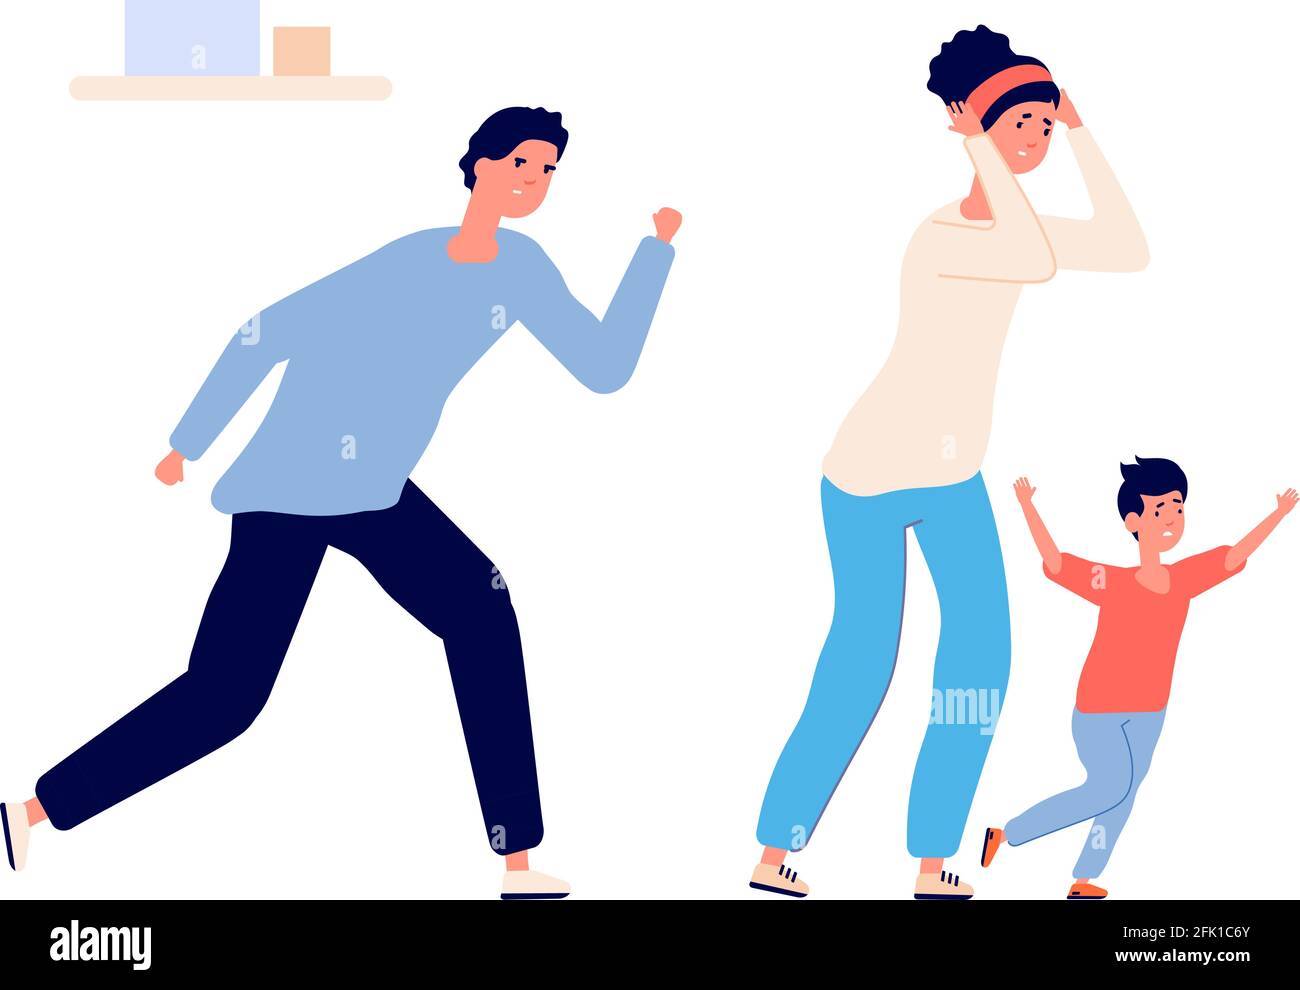 Family divorce. Angry people suffering, scolding, fight. Quarrel and violence, disregard feelings. Conflict relationships vector illustration Stock Vector